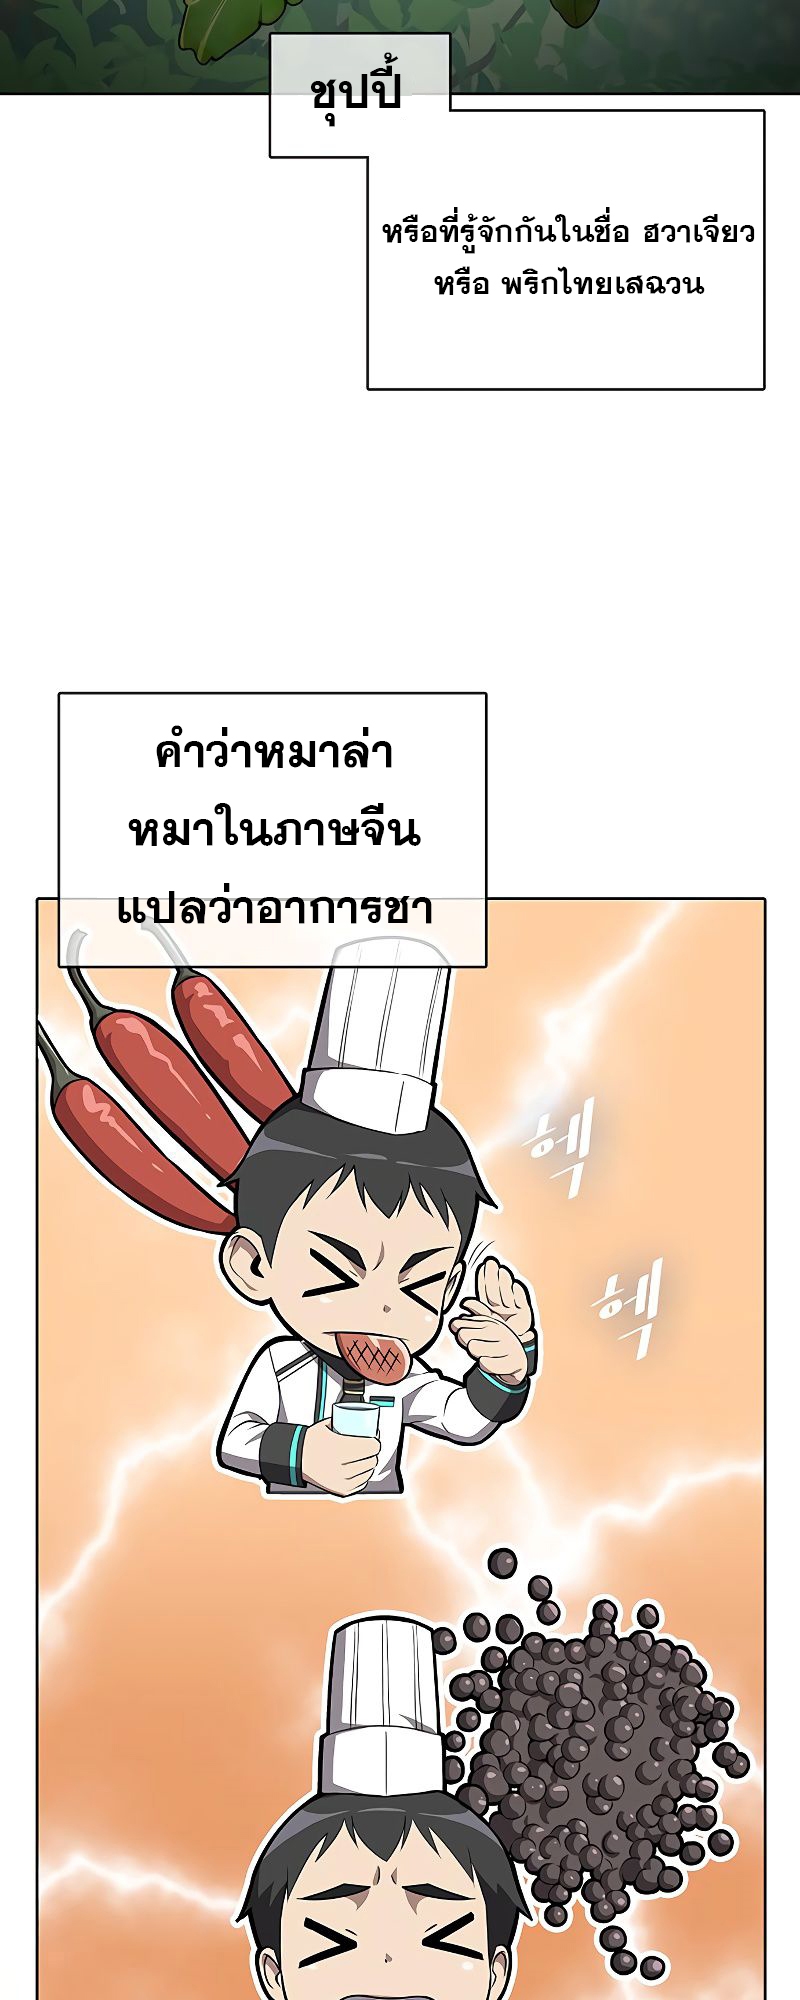 The Strongest Chef in Another World 7 11 3 25670026